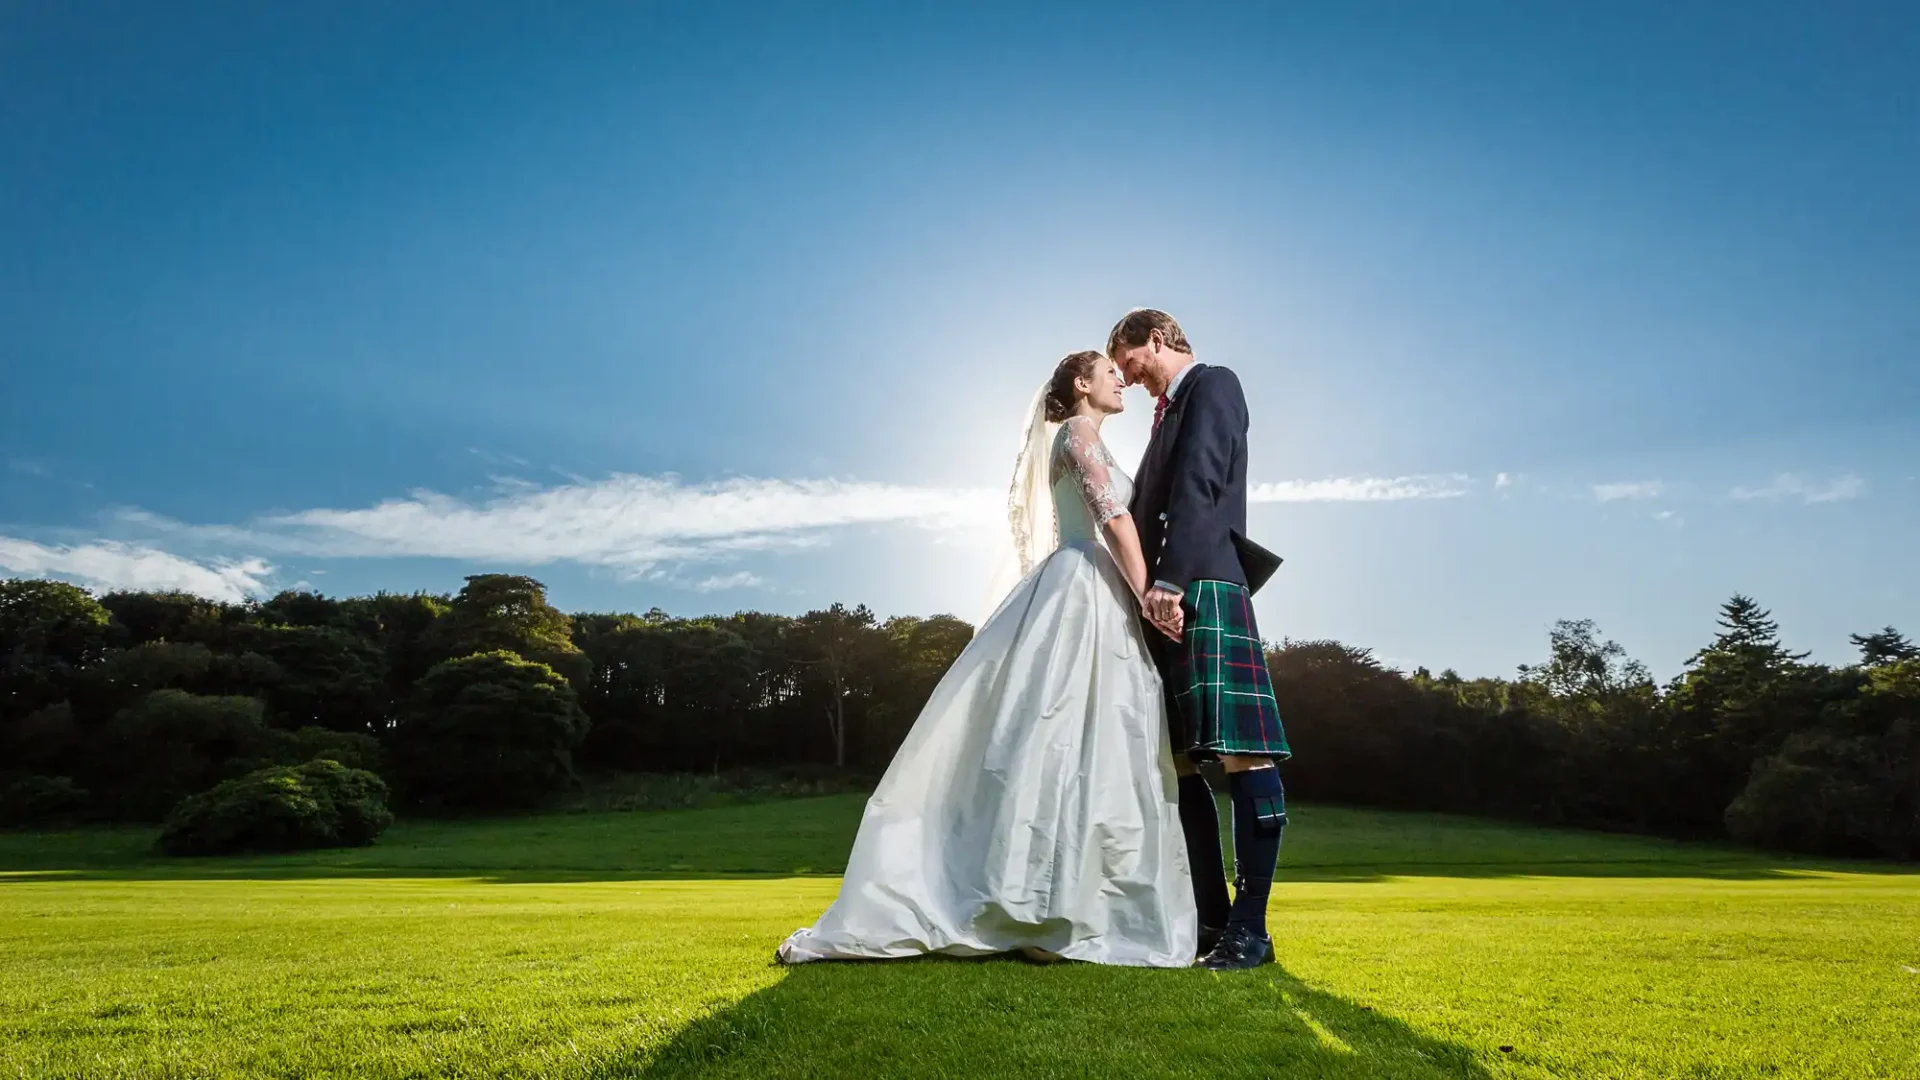 A bride and groom in a sunlit field, the bride in a white gown and the groom in a kilt, share a kiss under a bright sky.